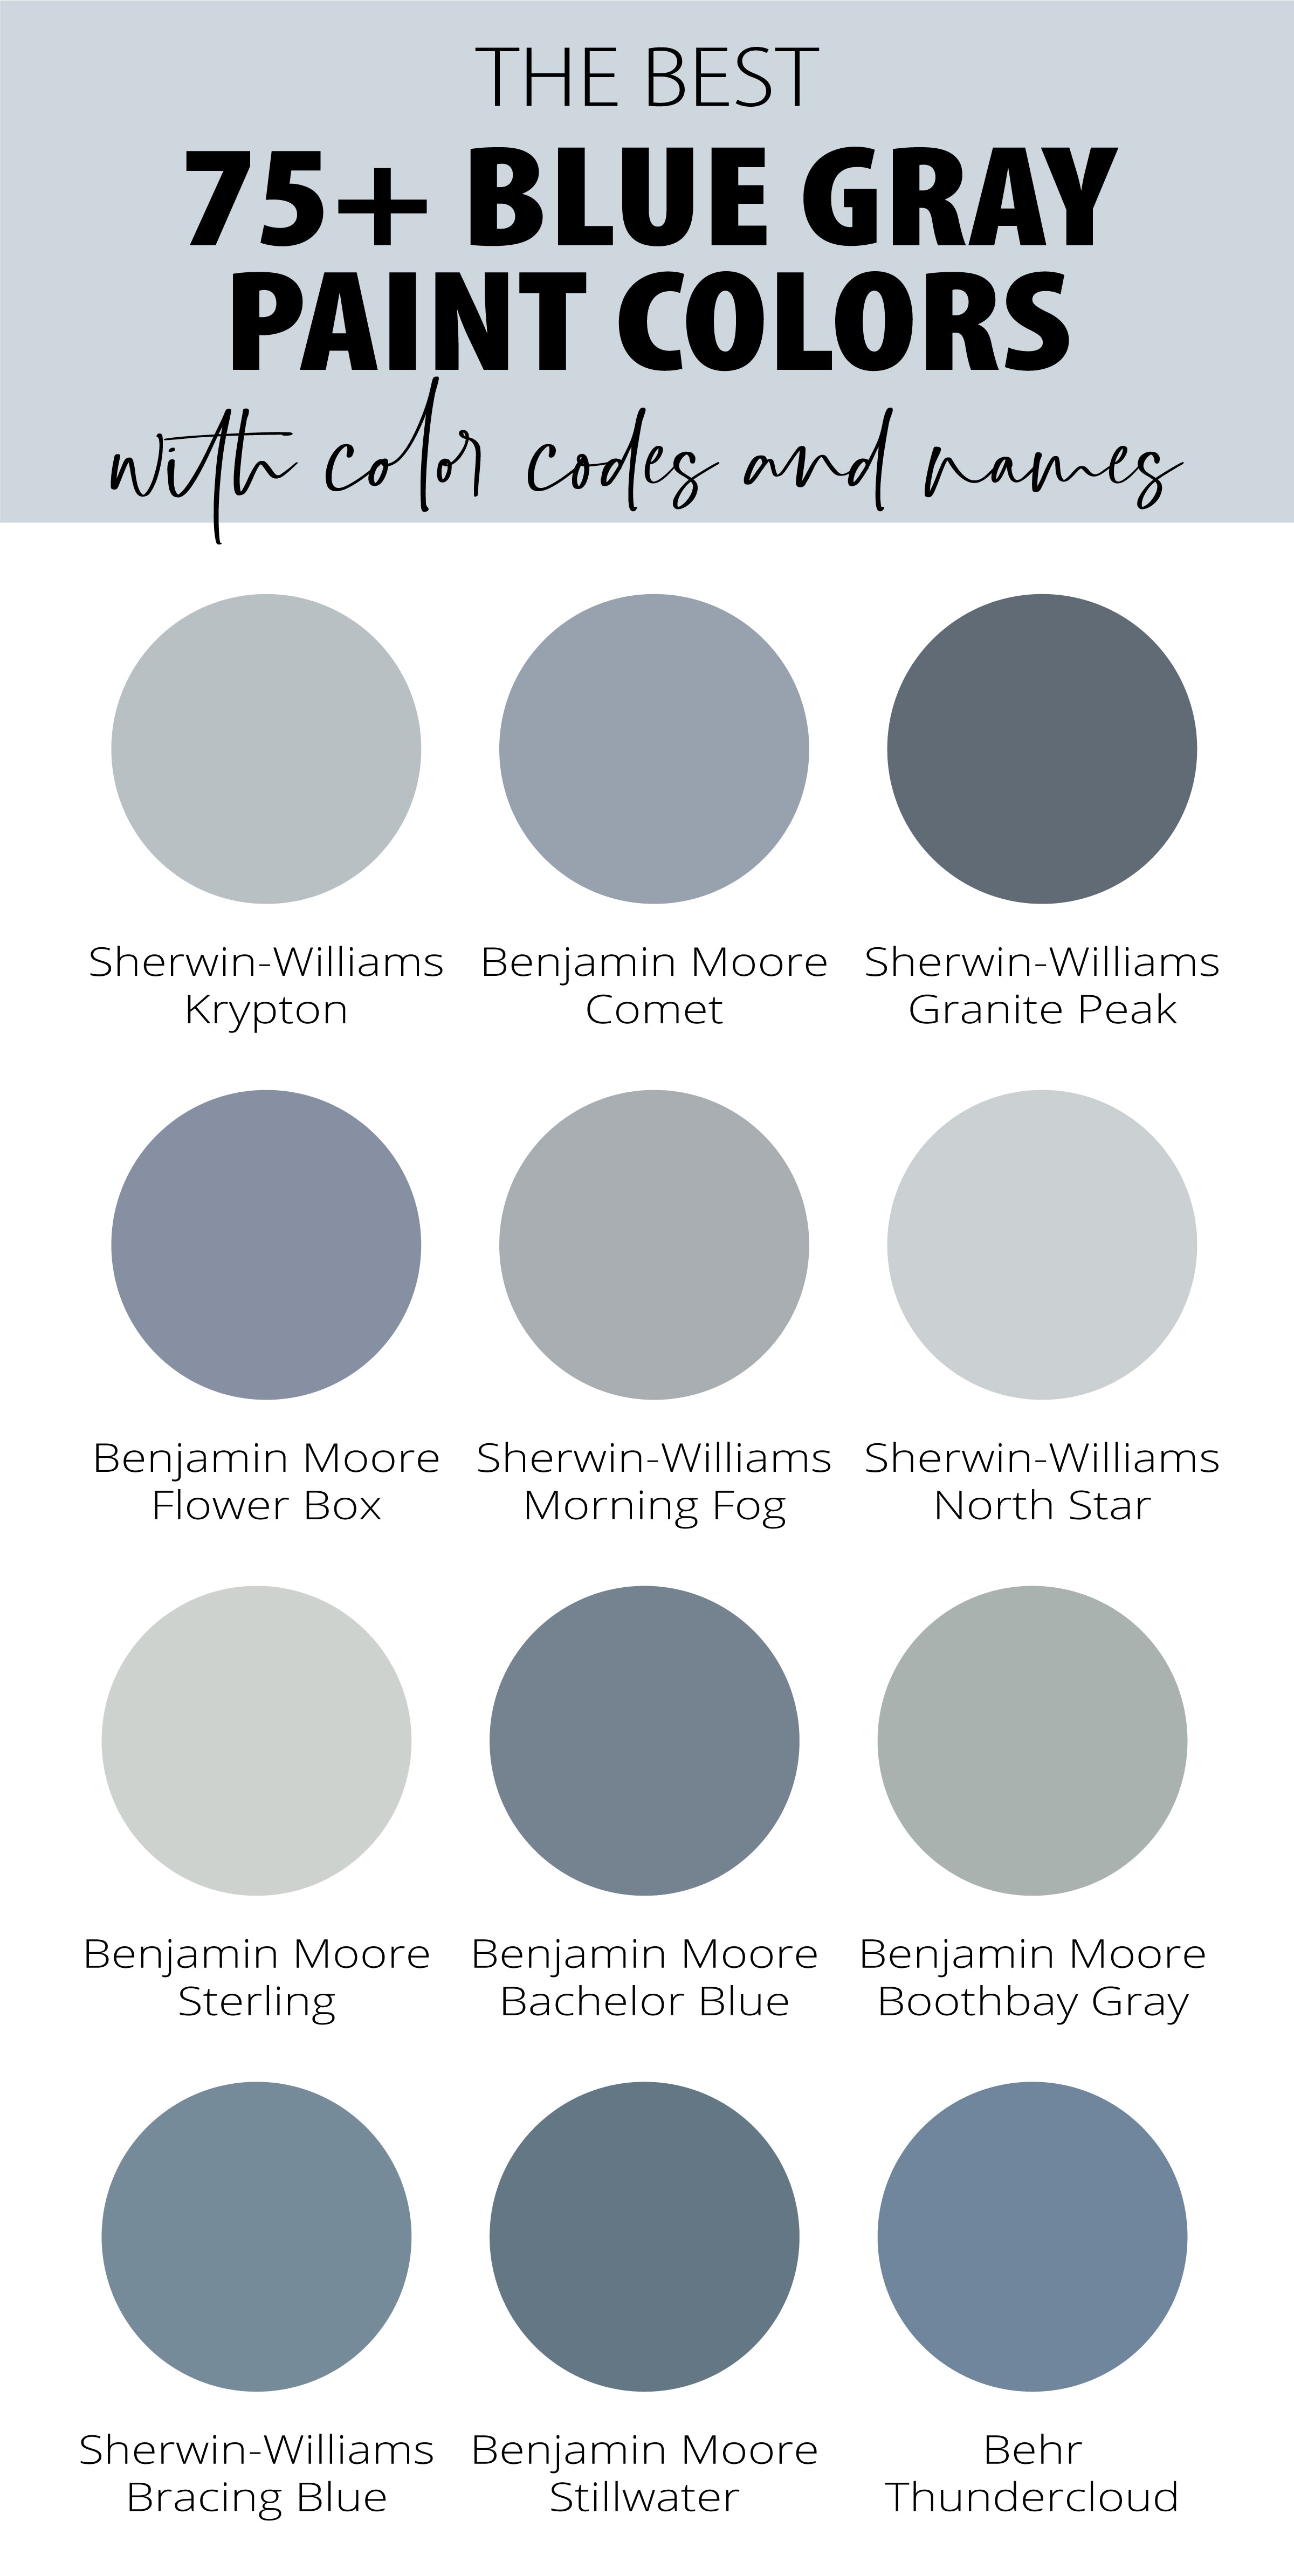 Best-Blue-Gray-Paint-Colors-with-Names-Pinterest-Tall